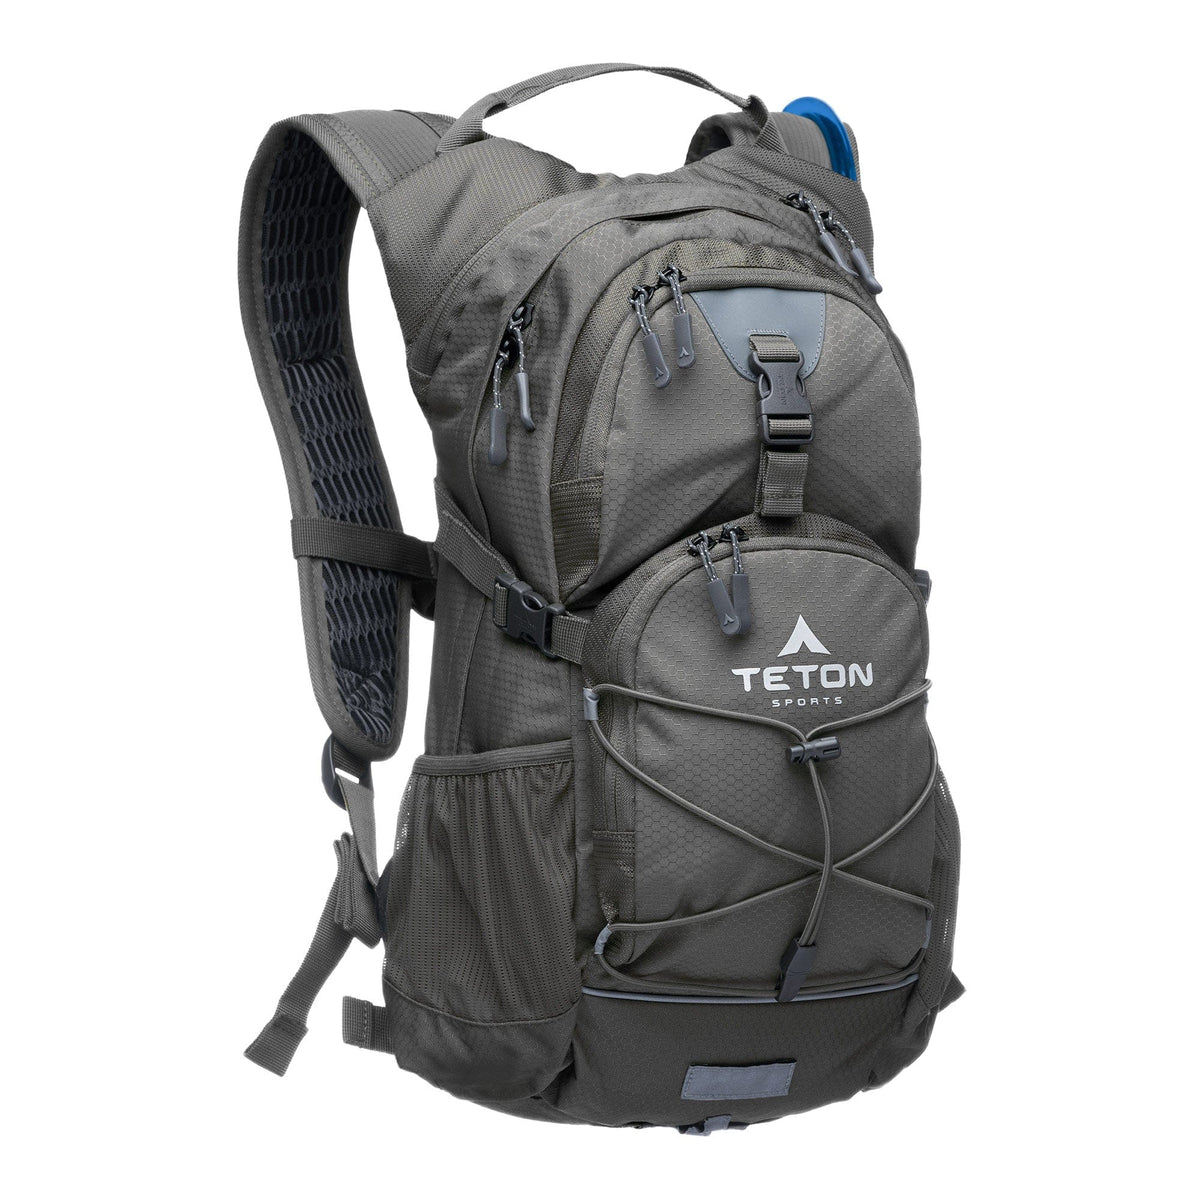 TETON Sports Oasis 22L Hydration Pack - OR Show '24 Gunmetal 2102SCGM-OR